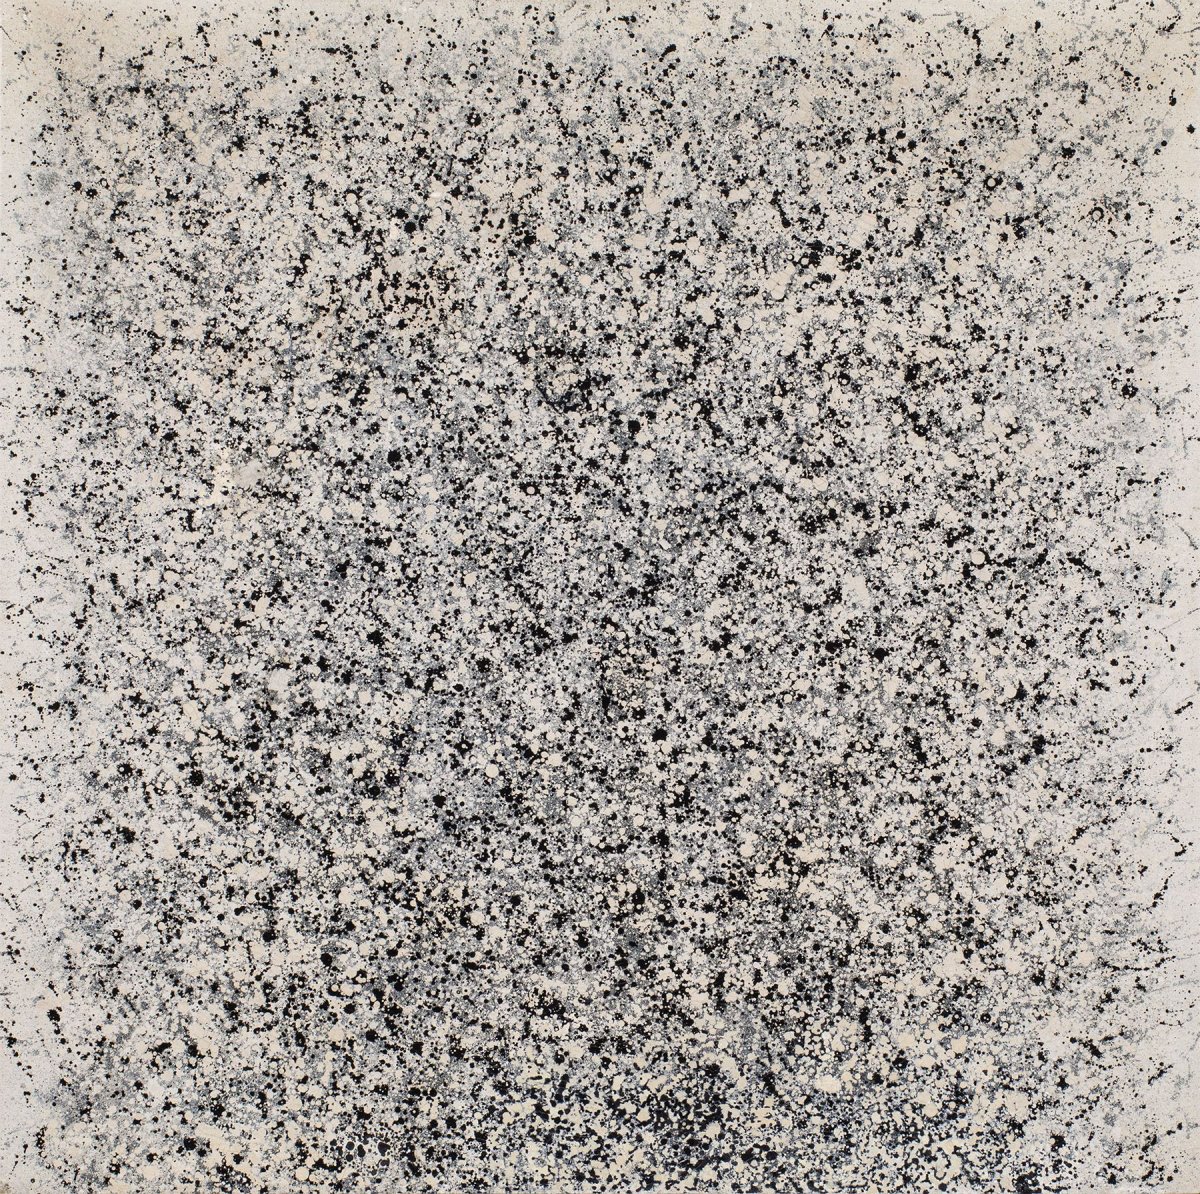 Mary Bauermeister, Untitled, 1959 